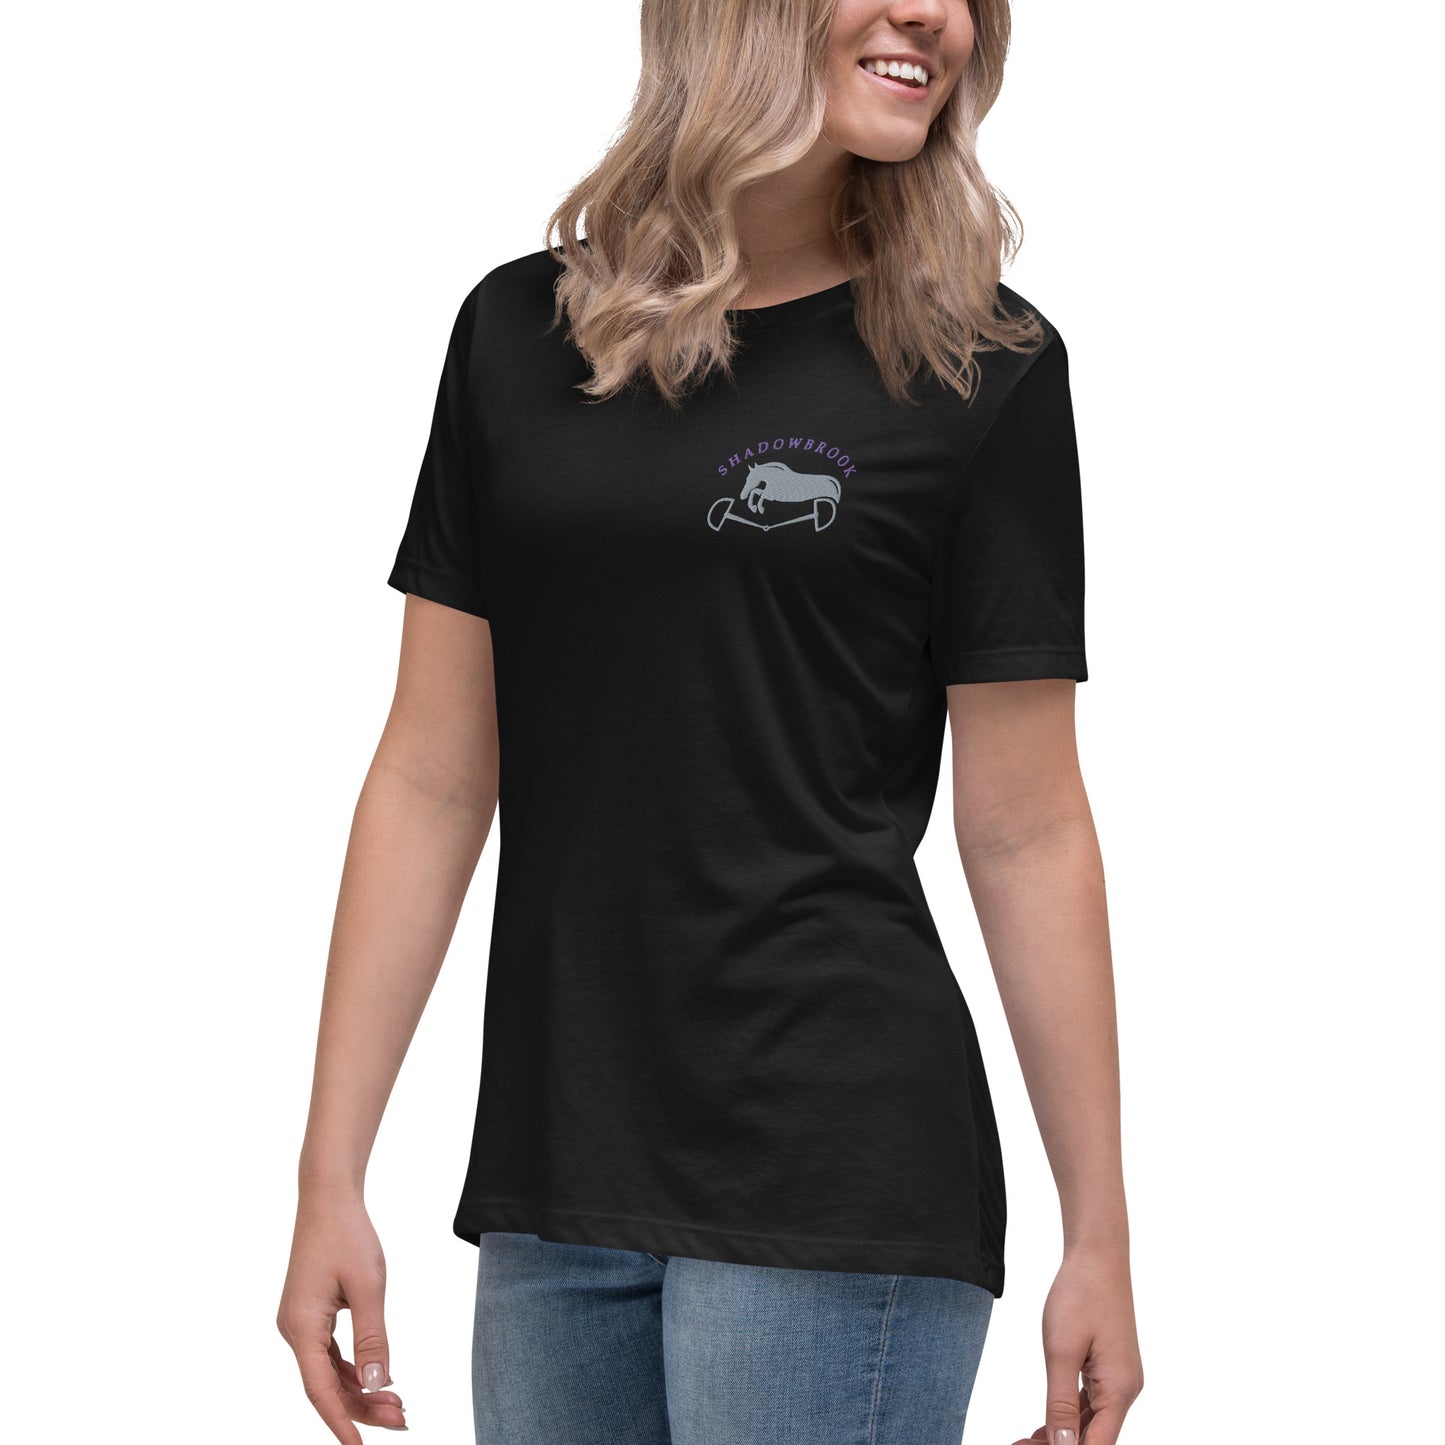 Shadowbrook Stables Black T-Shirt - Small Logo Front